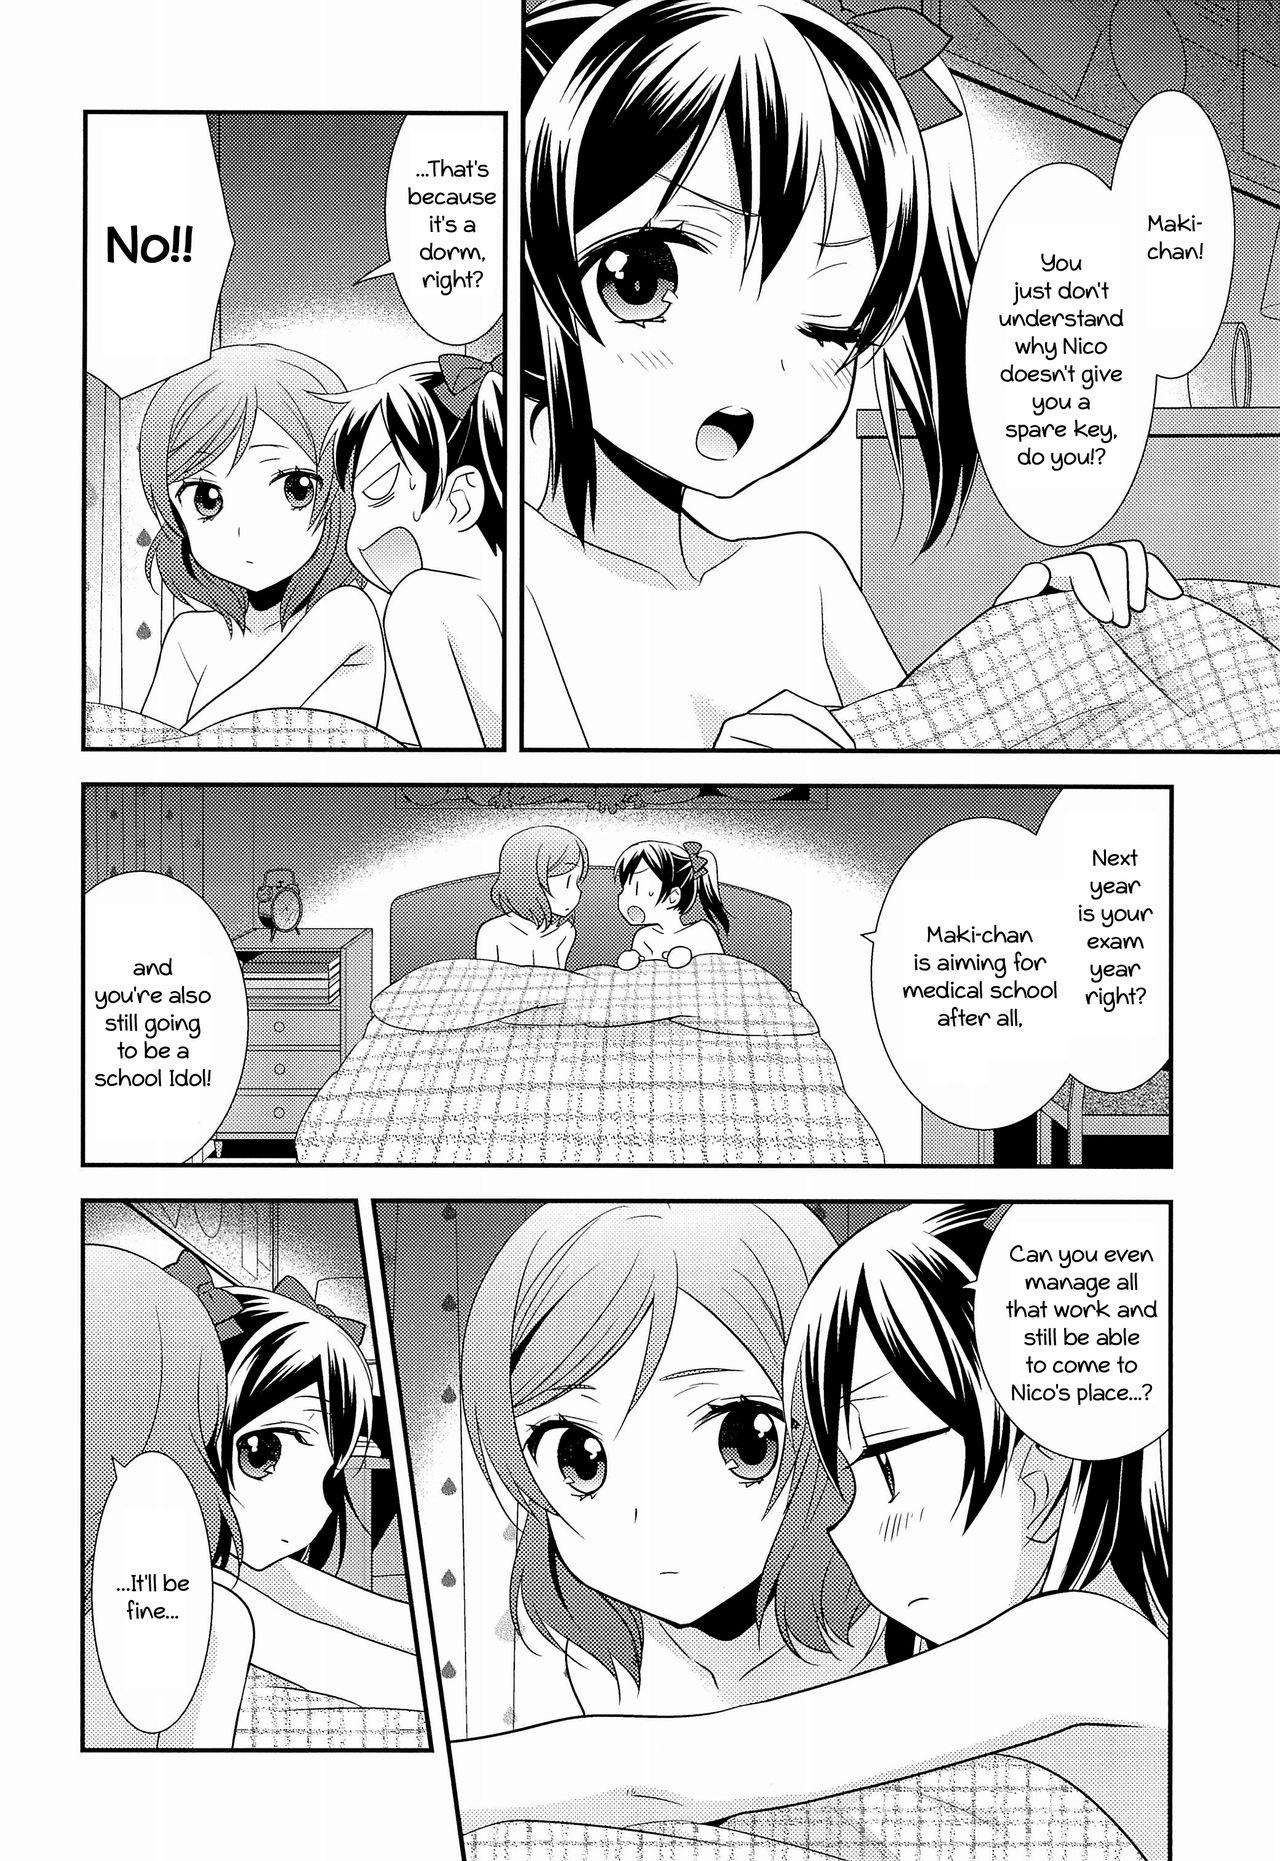 Buttplug BABY I LOVE YOU - Love live Cumshot - Page 8